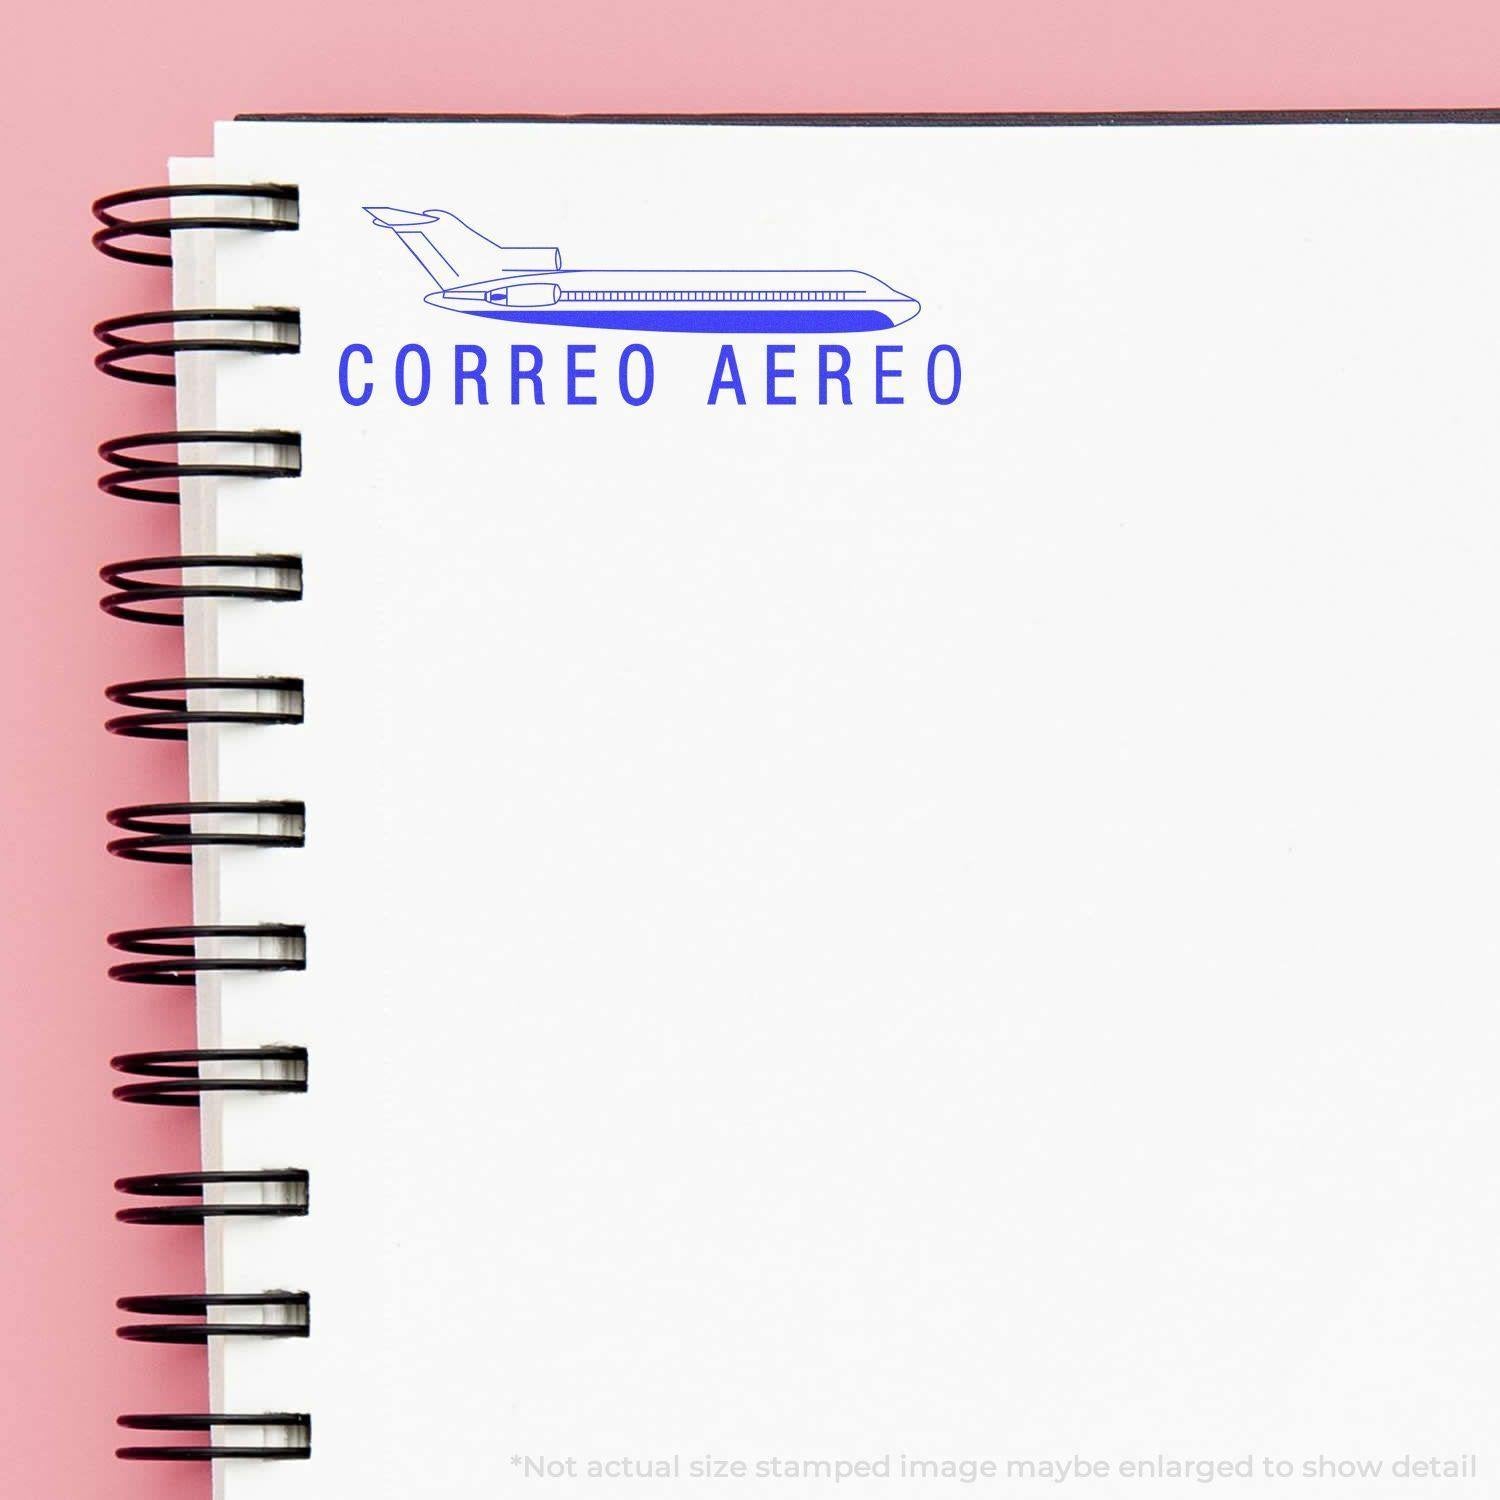 A stock office rubber stamp with a stamped image showing how the text "CORREO AERO" with an icon of a plane above the text is displayed after stamping.